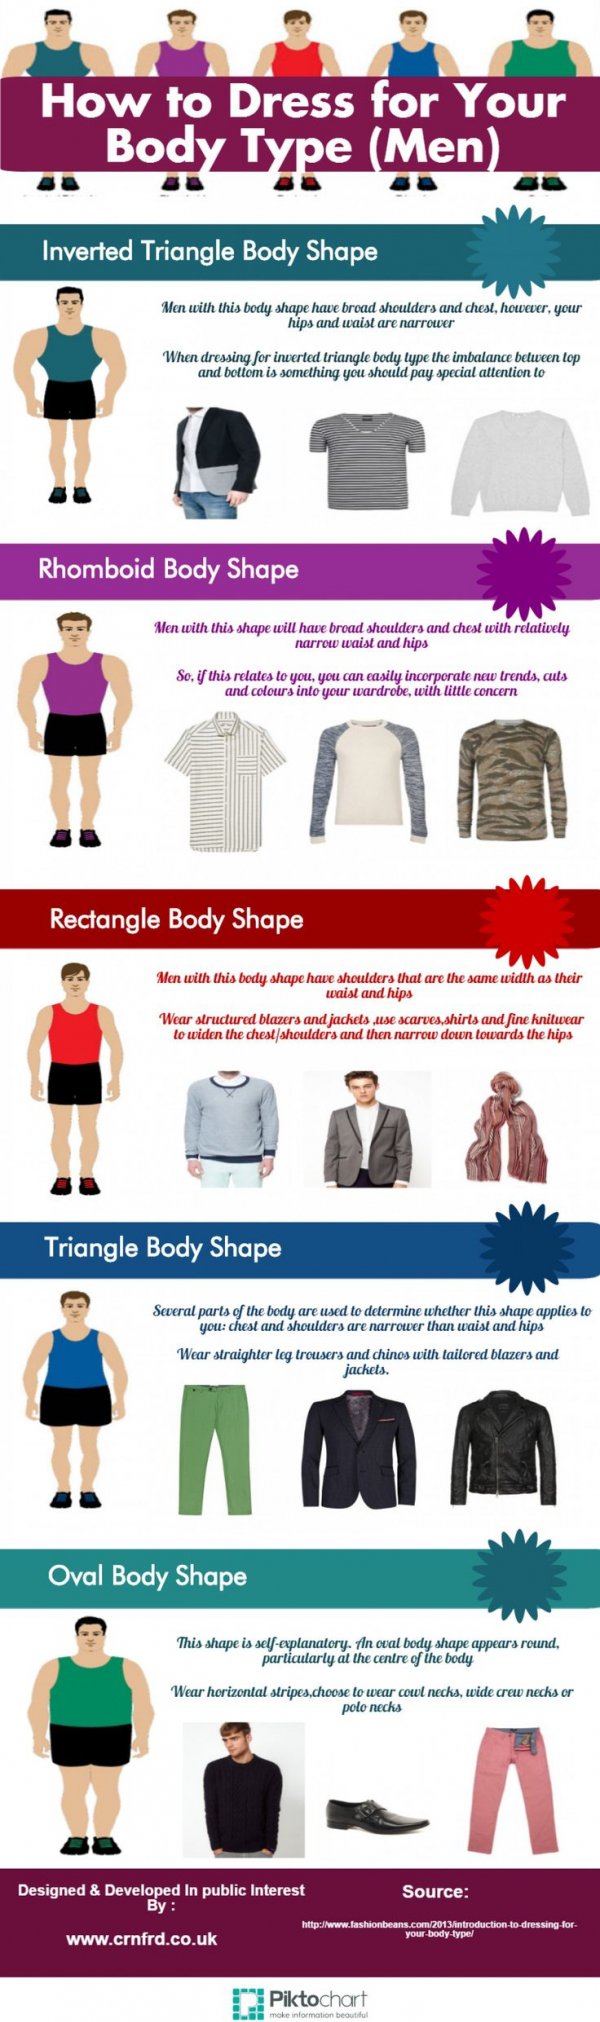 How to Dress for Your Body Type (Men)